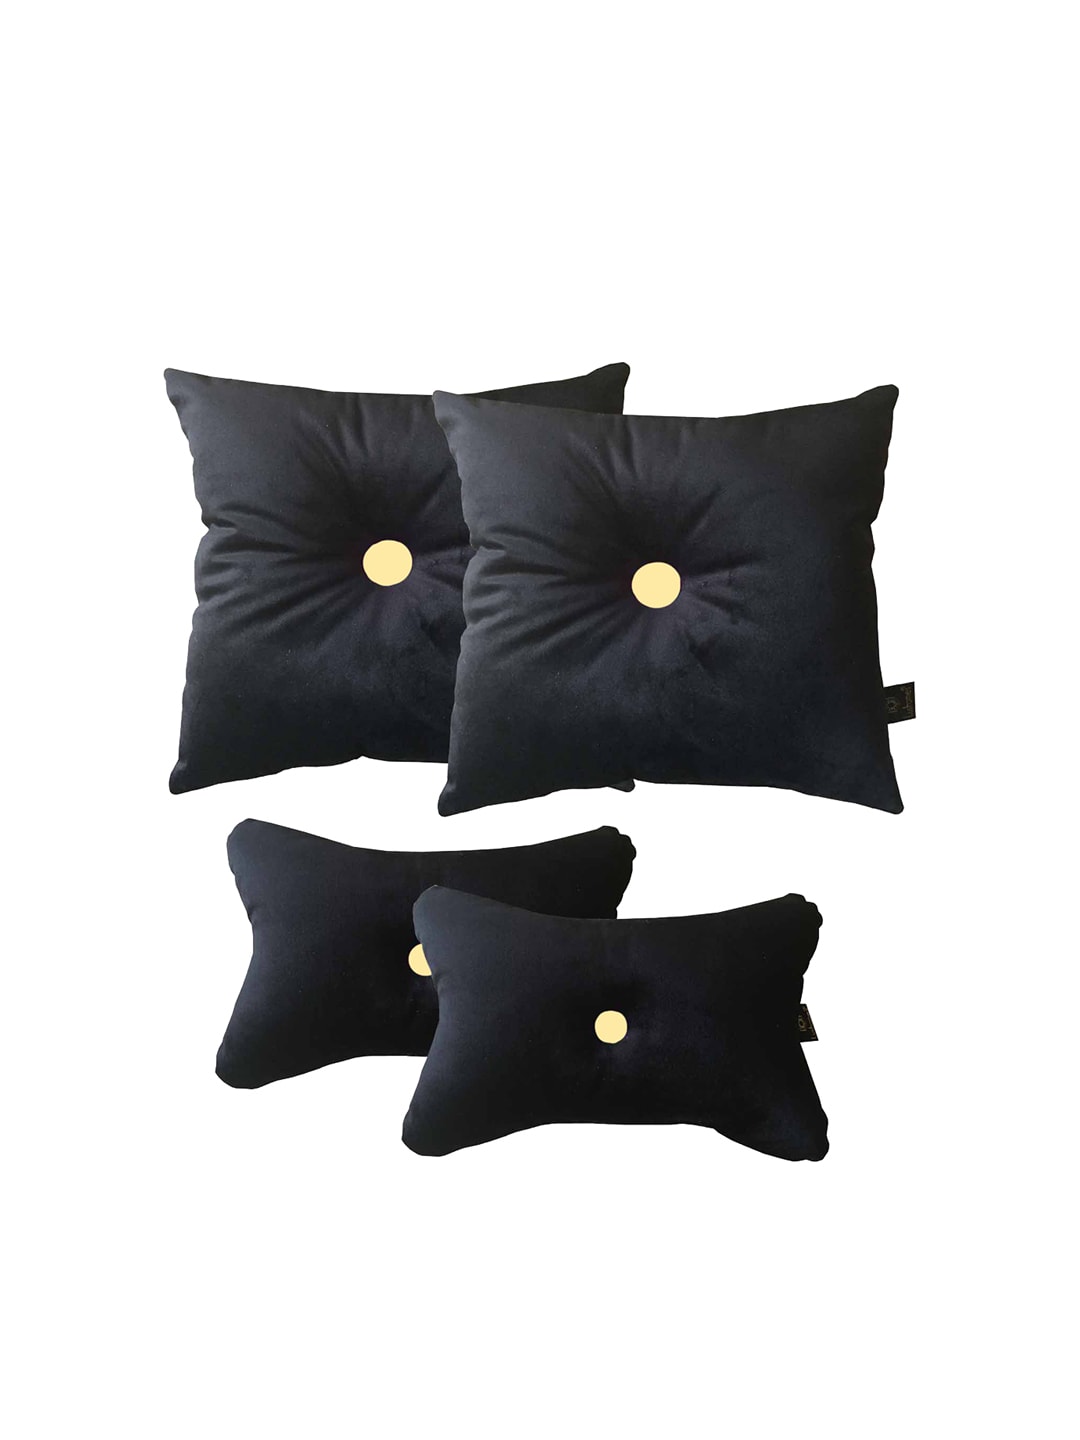 Lushomes Black Set of 4 Solid Velvet Neck Rest Car Cushions Price in India